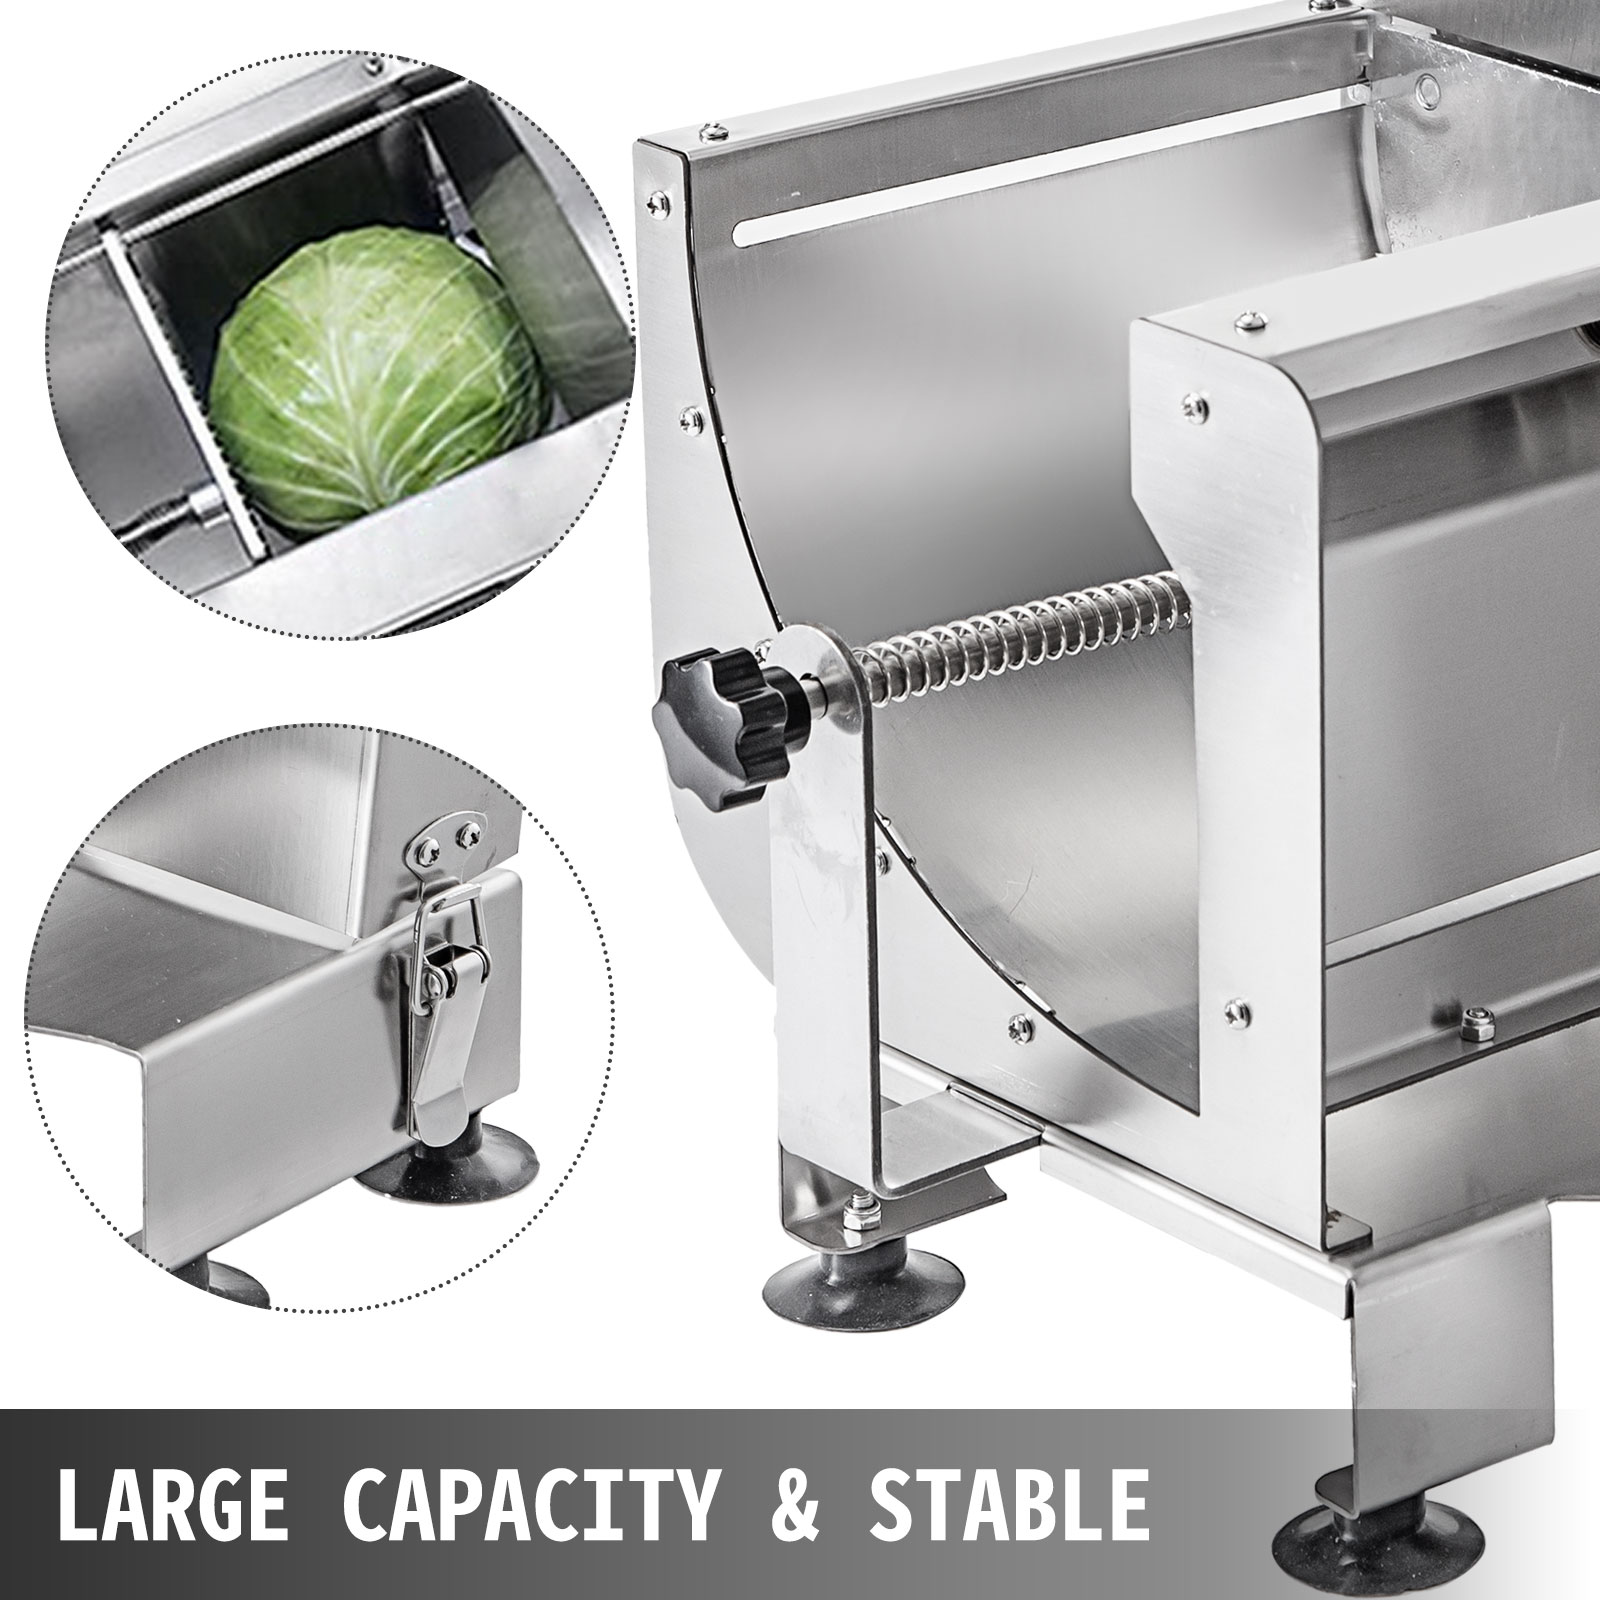 High-end Stainless Steel Multifunctional Vegetable Cutter, Manual